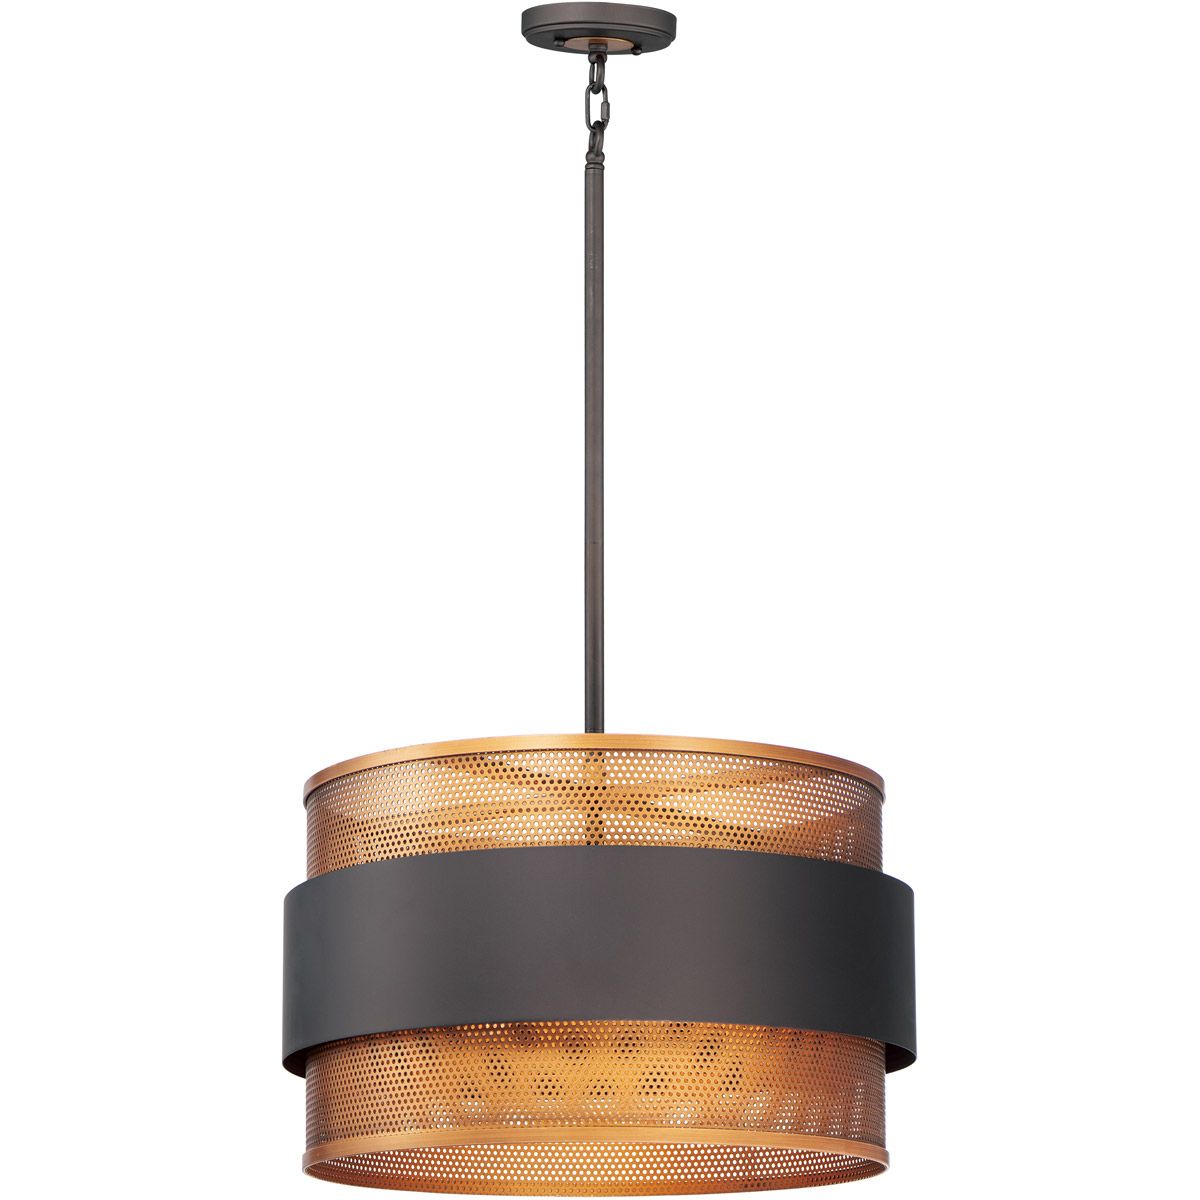 Maxim Lighting 31204oiab Caspian Pendant Oil Rubbed Bronze Within Oil Rubbed Bronze And Antique Brass Four Light Chandeliers (View 4 of 15)